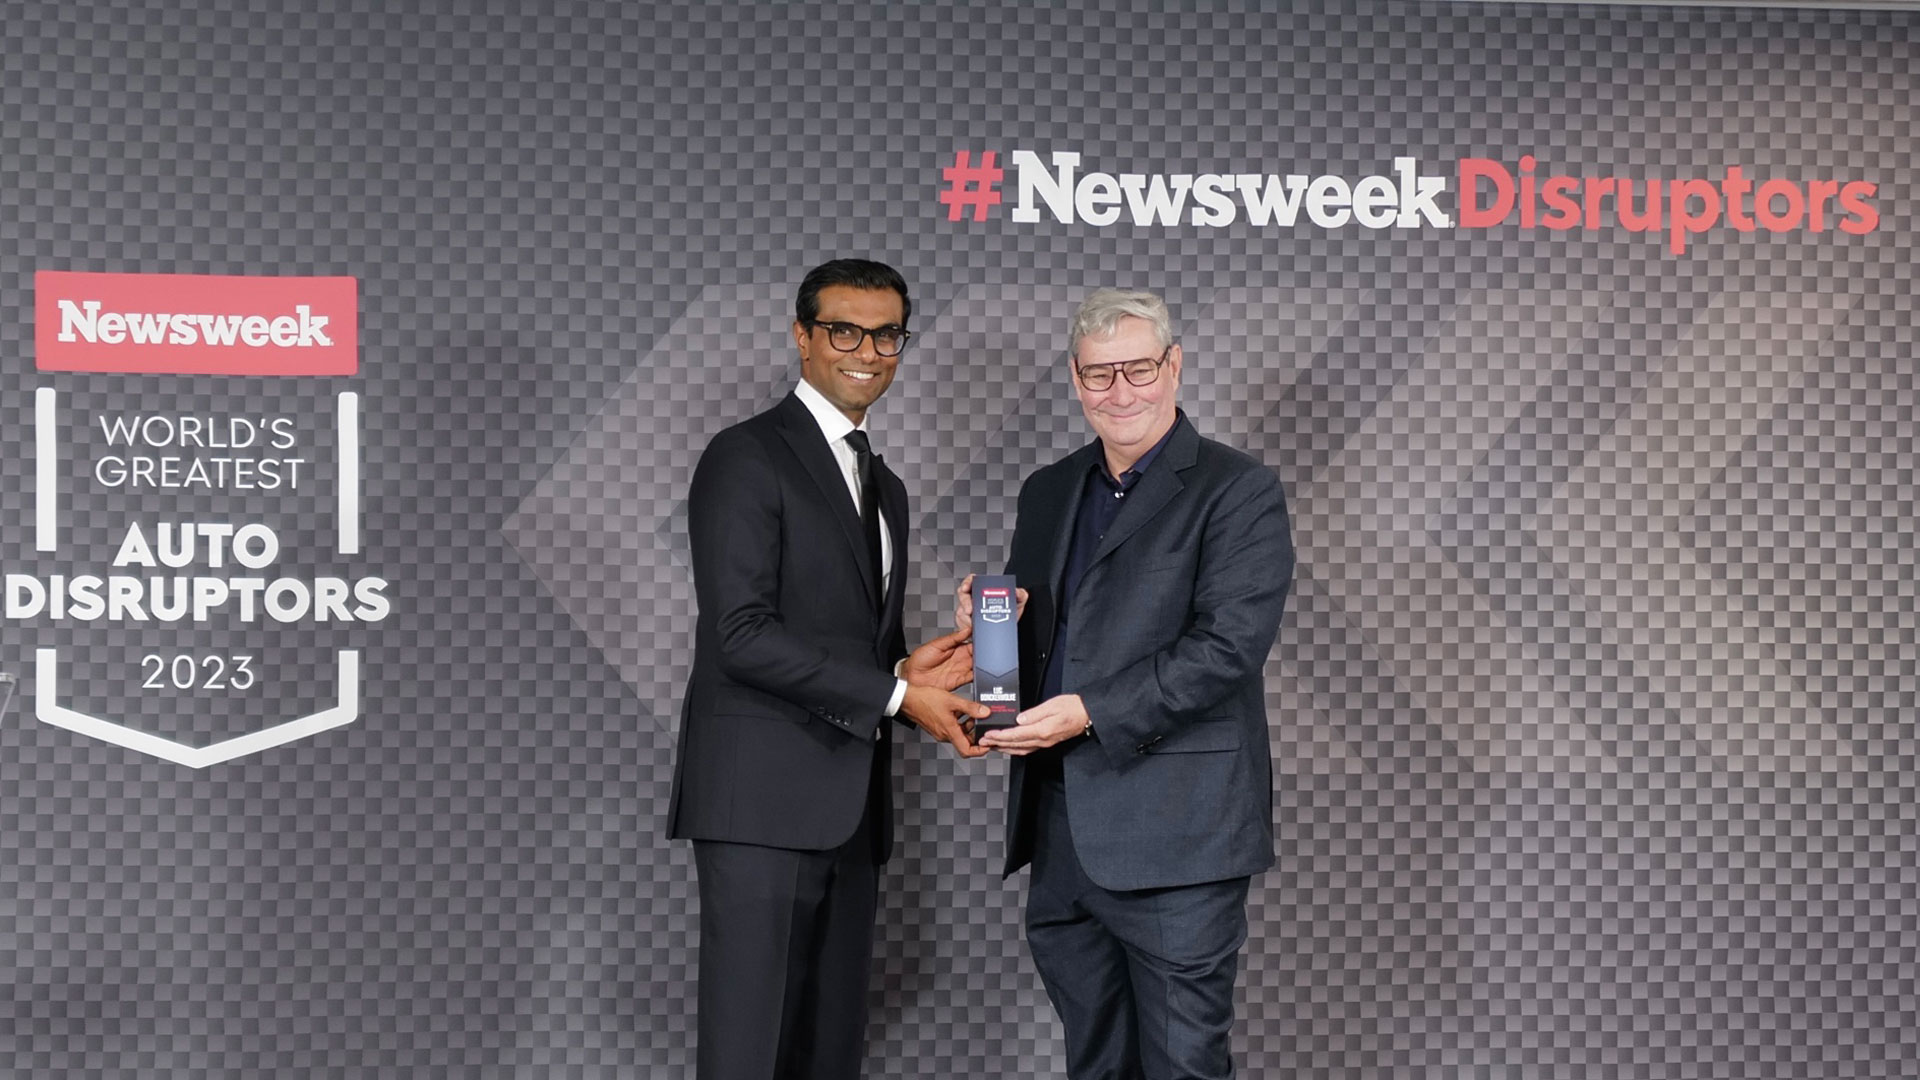 Hyundai Motor Group CCO Luc Donckerwolke Recognized as Disruptor Designer of the Year at Newsweek’s World’s Greatest Auto Disruptors Awards